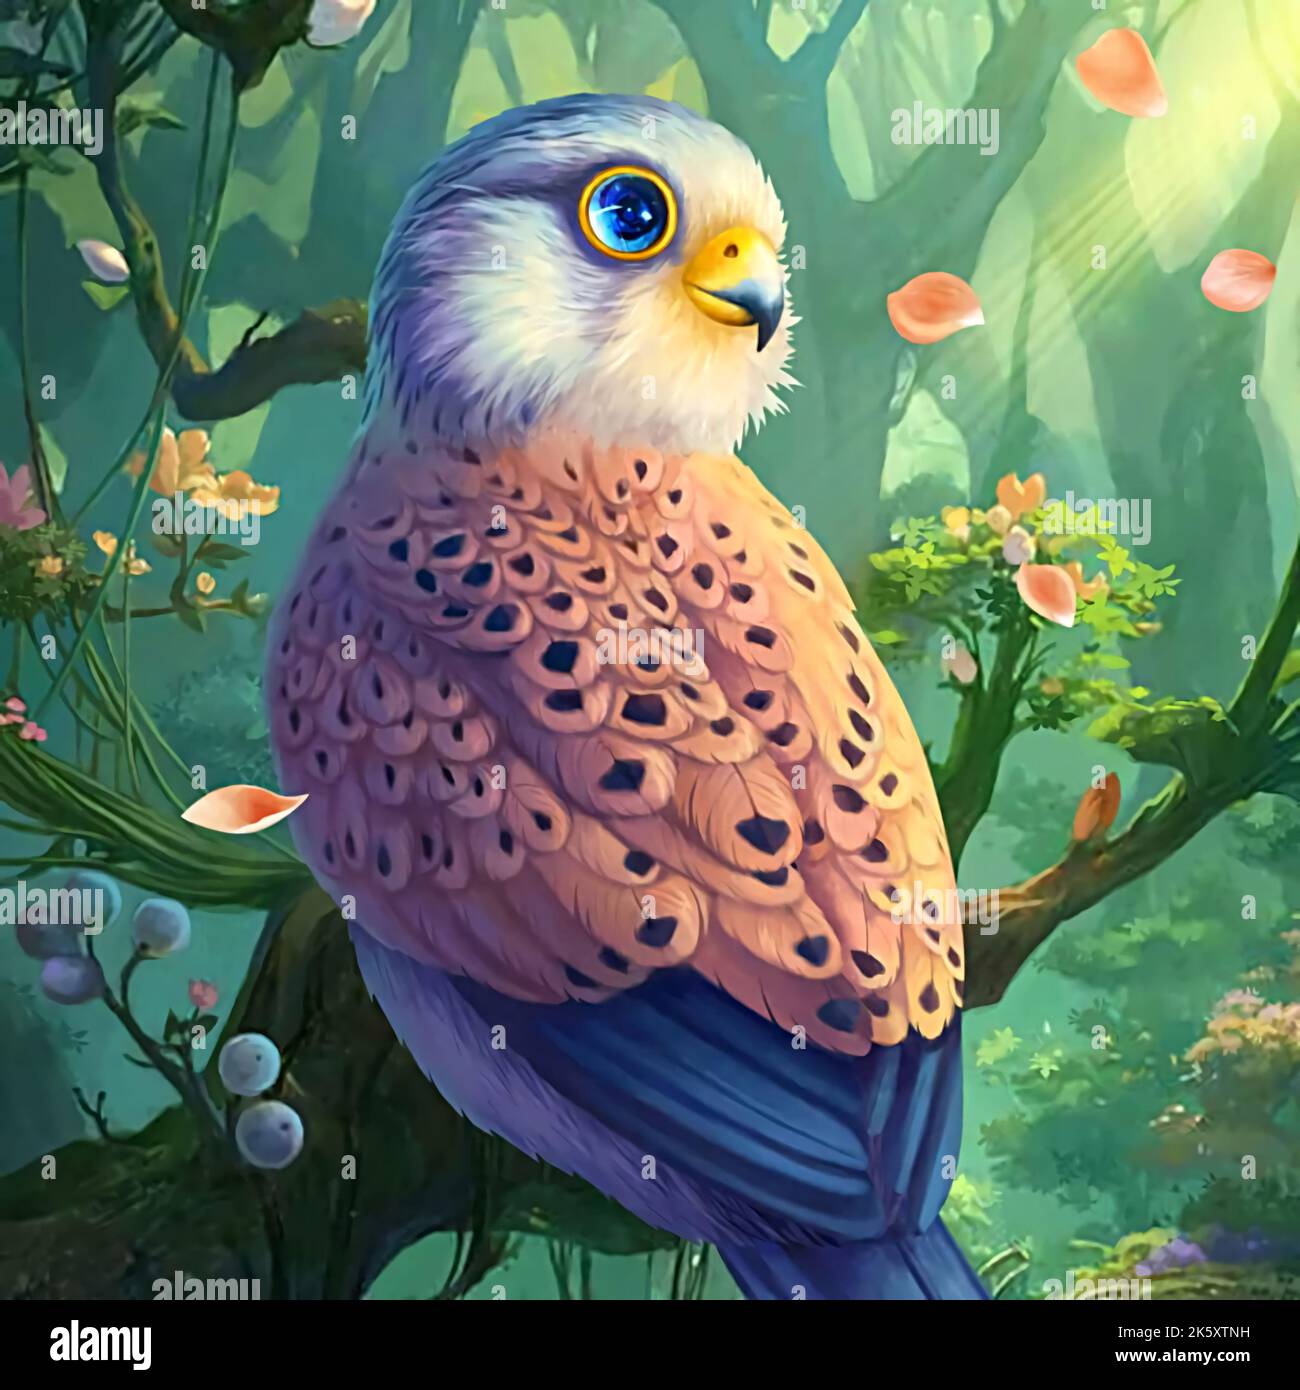 illustration of a very beautiful bird in the forest Stock Photo